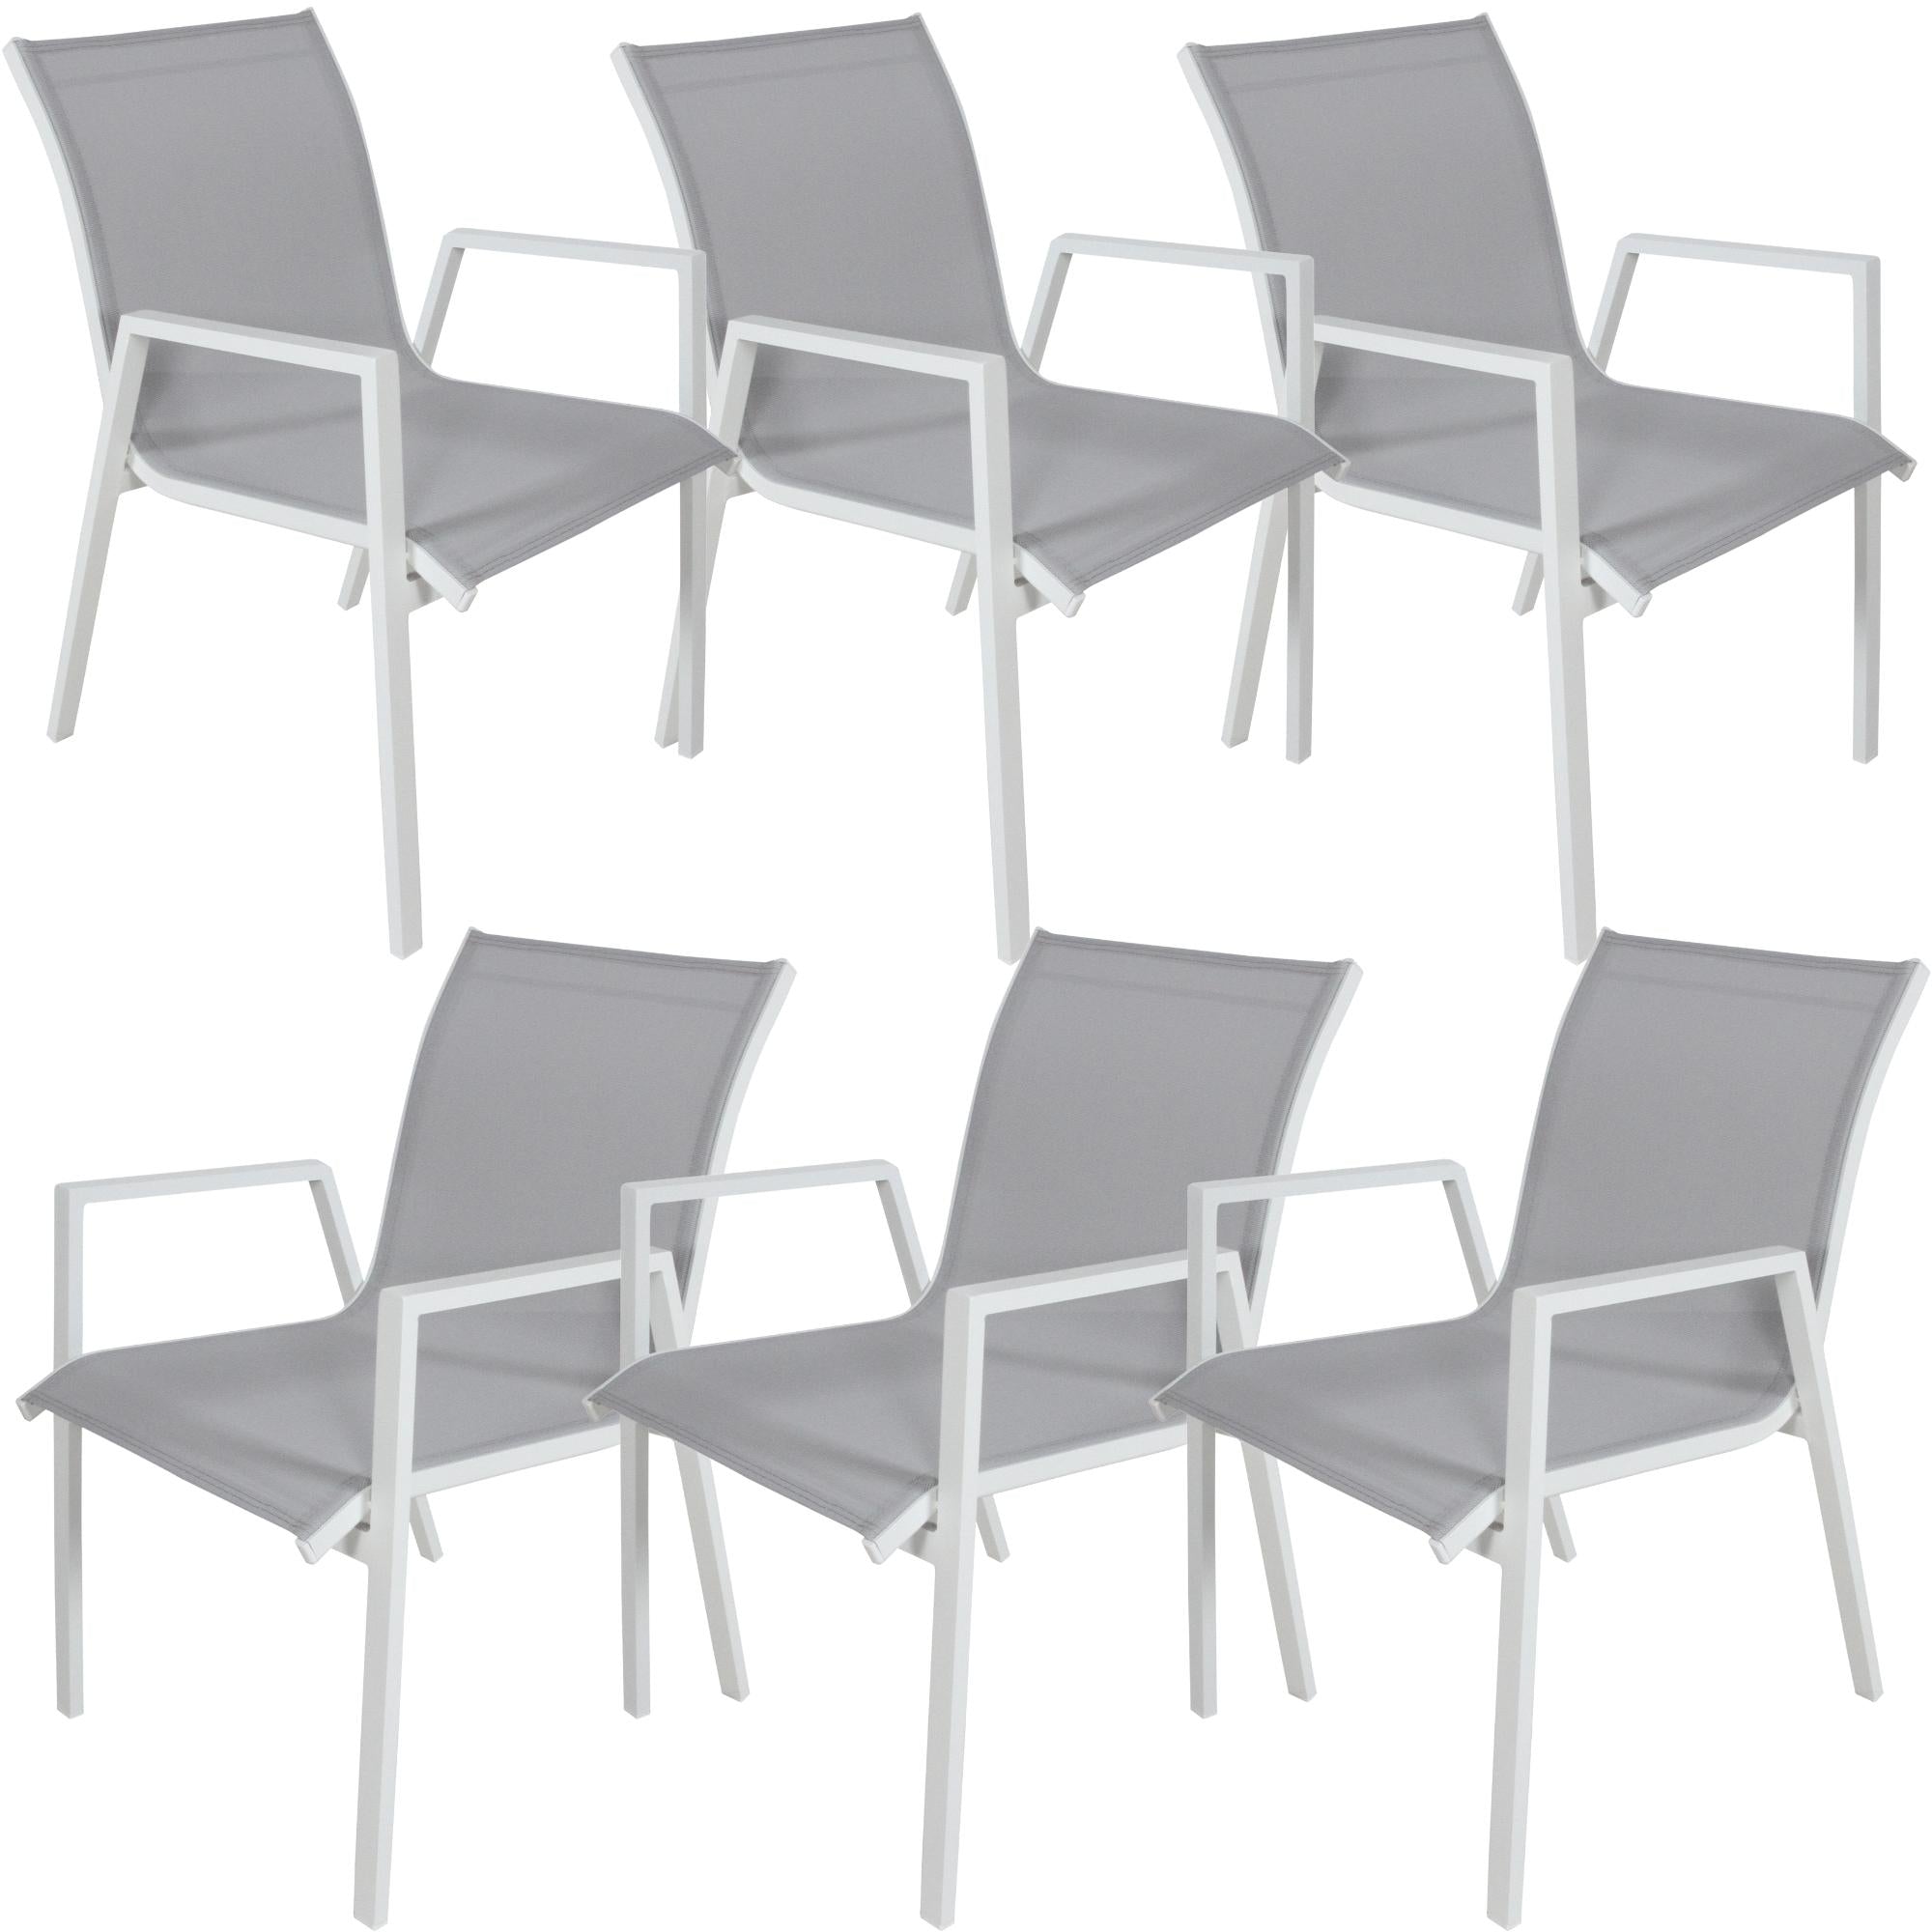 All-Weather Aluminium Outdoor Dining Chairs Set of 6 White